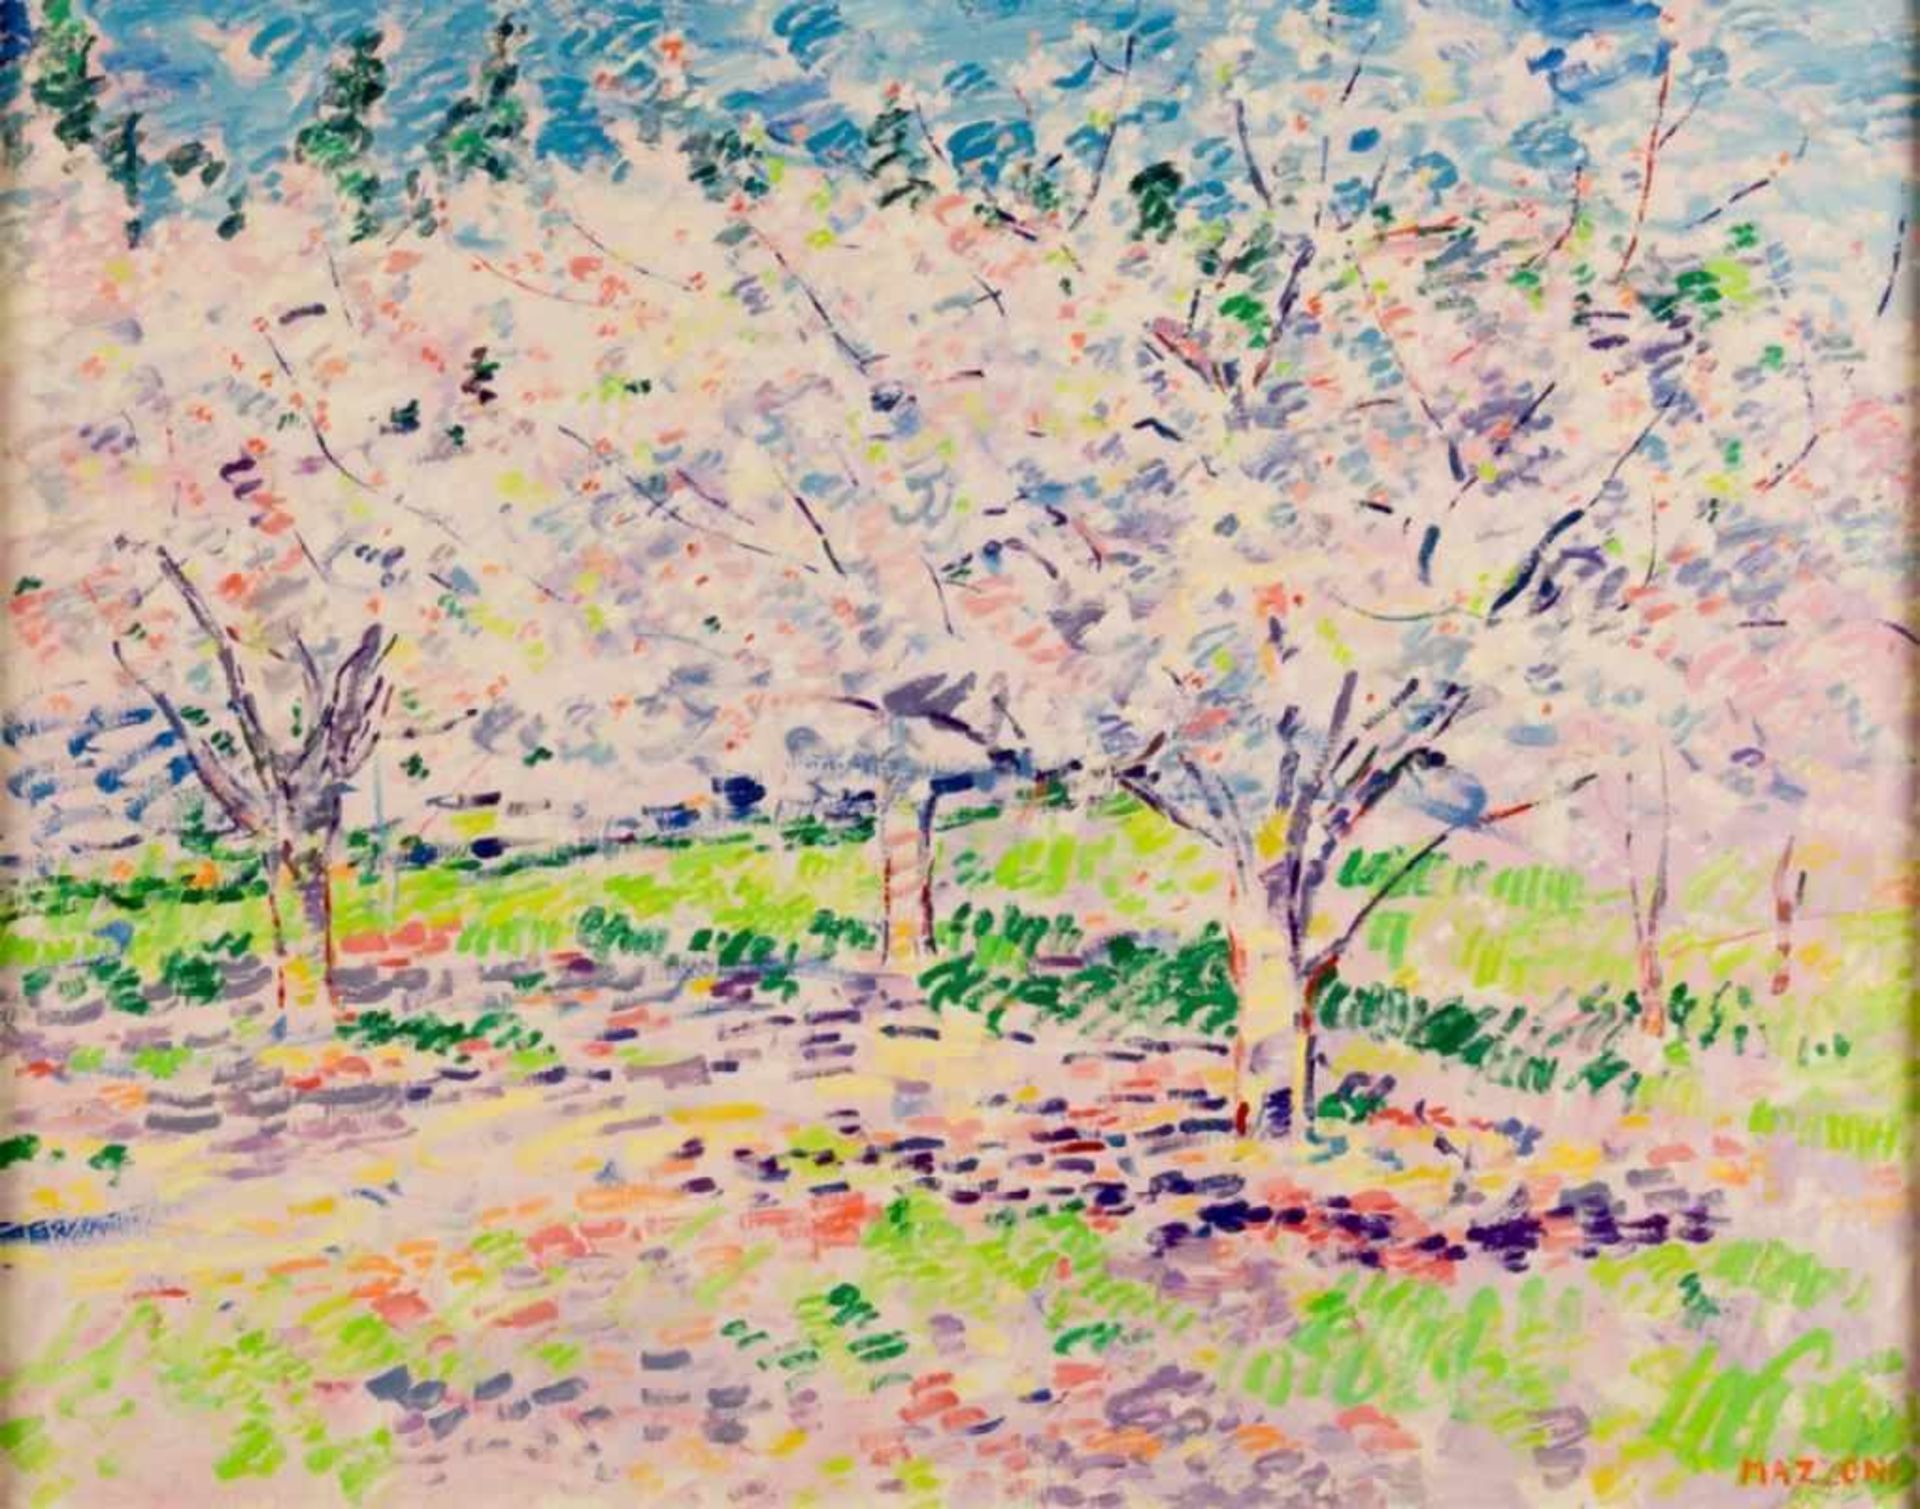 Franco MAZZONI (1928-2006), Flowering orchard, Oil on canvas, signed, 74 x 92,5 cm, frame:107,5 x 89